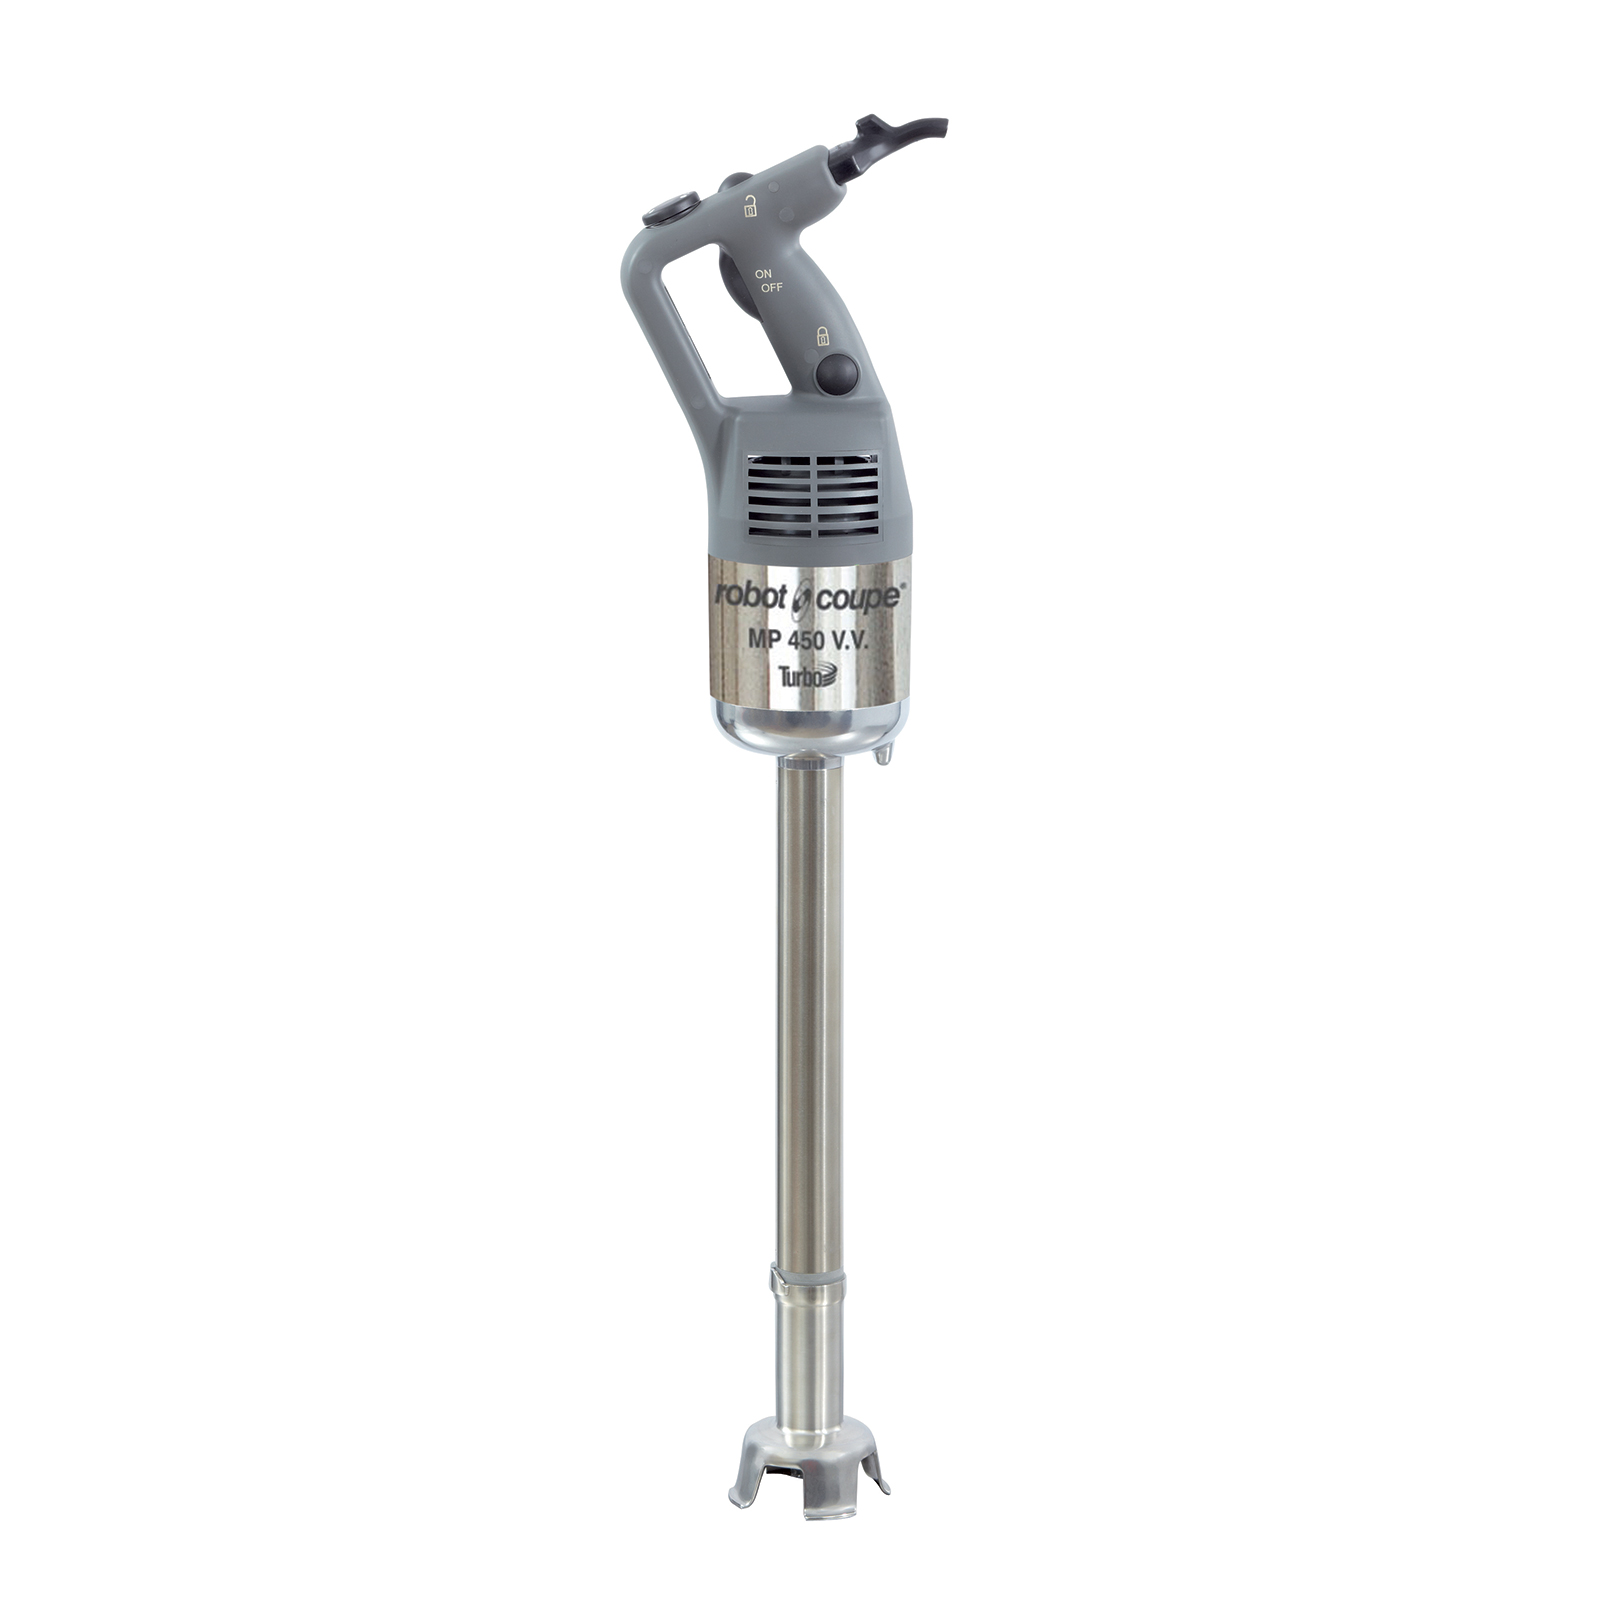 Commercial Power Mixer, hand
held, 18&quot; stainless steel
shaft, removable stainless
steel foot &amp; blade, includes:
(1) stainless steel wall
support &amp; (1) blade
disassembly tool, 100 liter
processing capacity, variable
speed 3,000 - 10,000 RPM, 1.1
HP, 120v/60/1-ph, 6.0 amps,
720 watts, NEMA 5-15P, &quot;Easy
plug&quot; system with detachable
power cord, cETLus,
ETL-Sanitation,

1 year replacement warranty